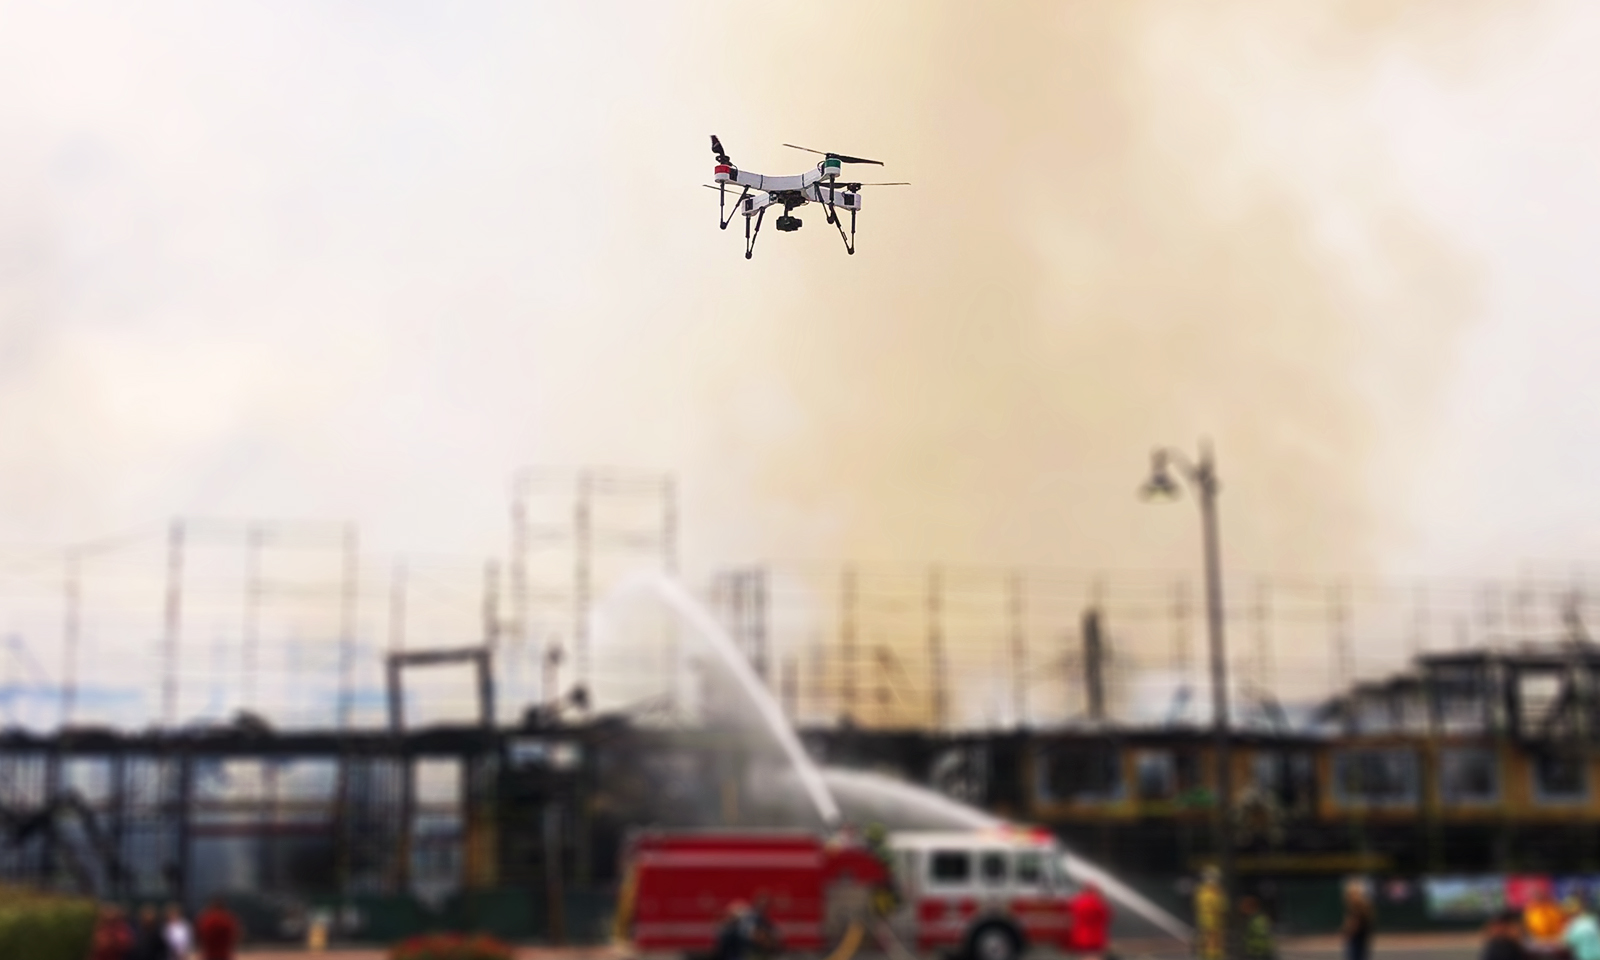 Drone flying in front of firefighters extinguishing a building fire